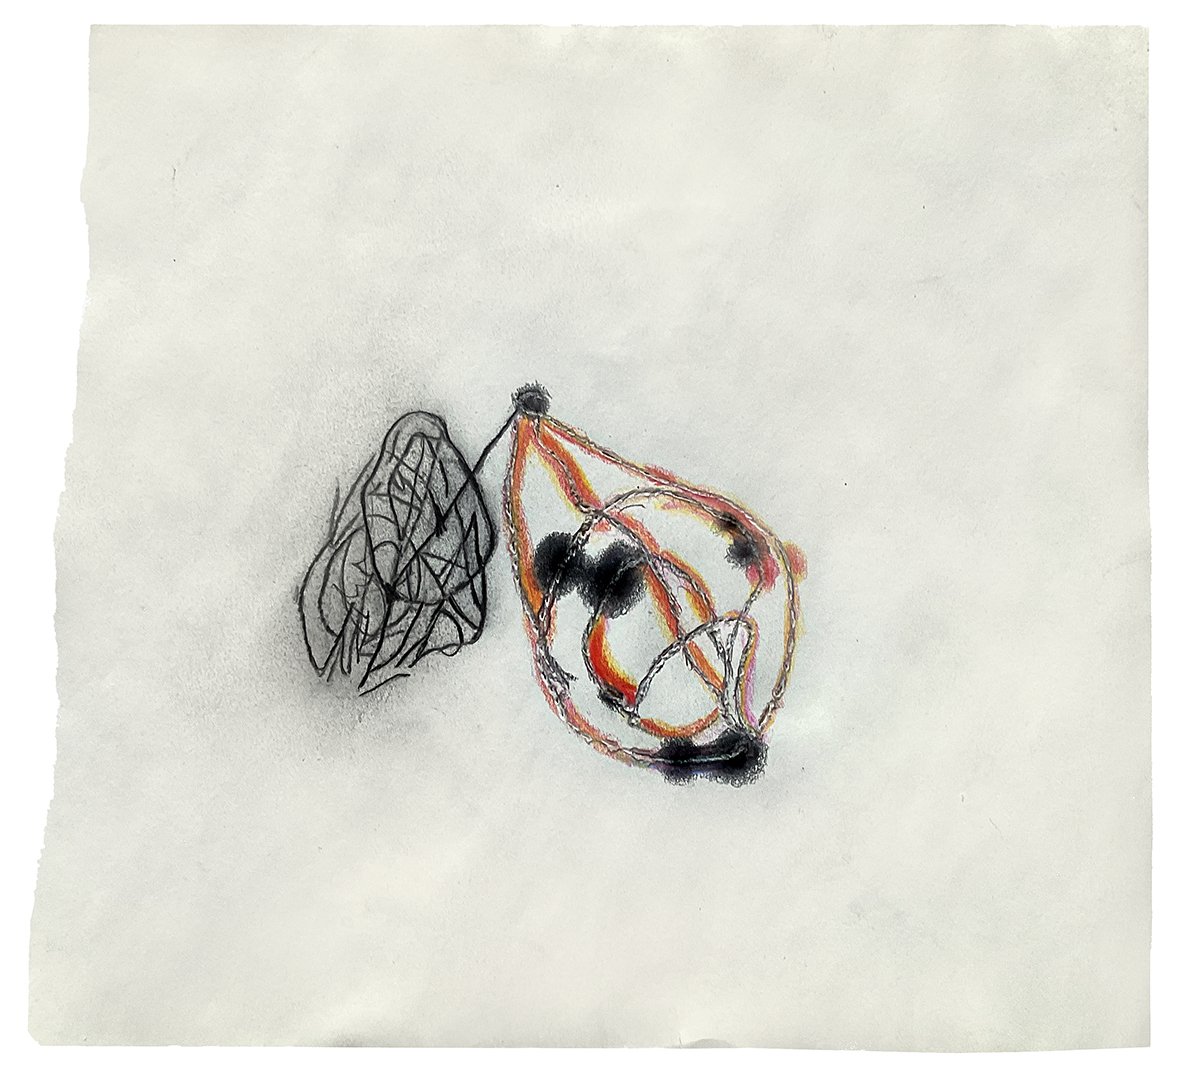 Untitled_1. 2023. Graphite, crayon on paper. 20x22cm